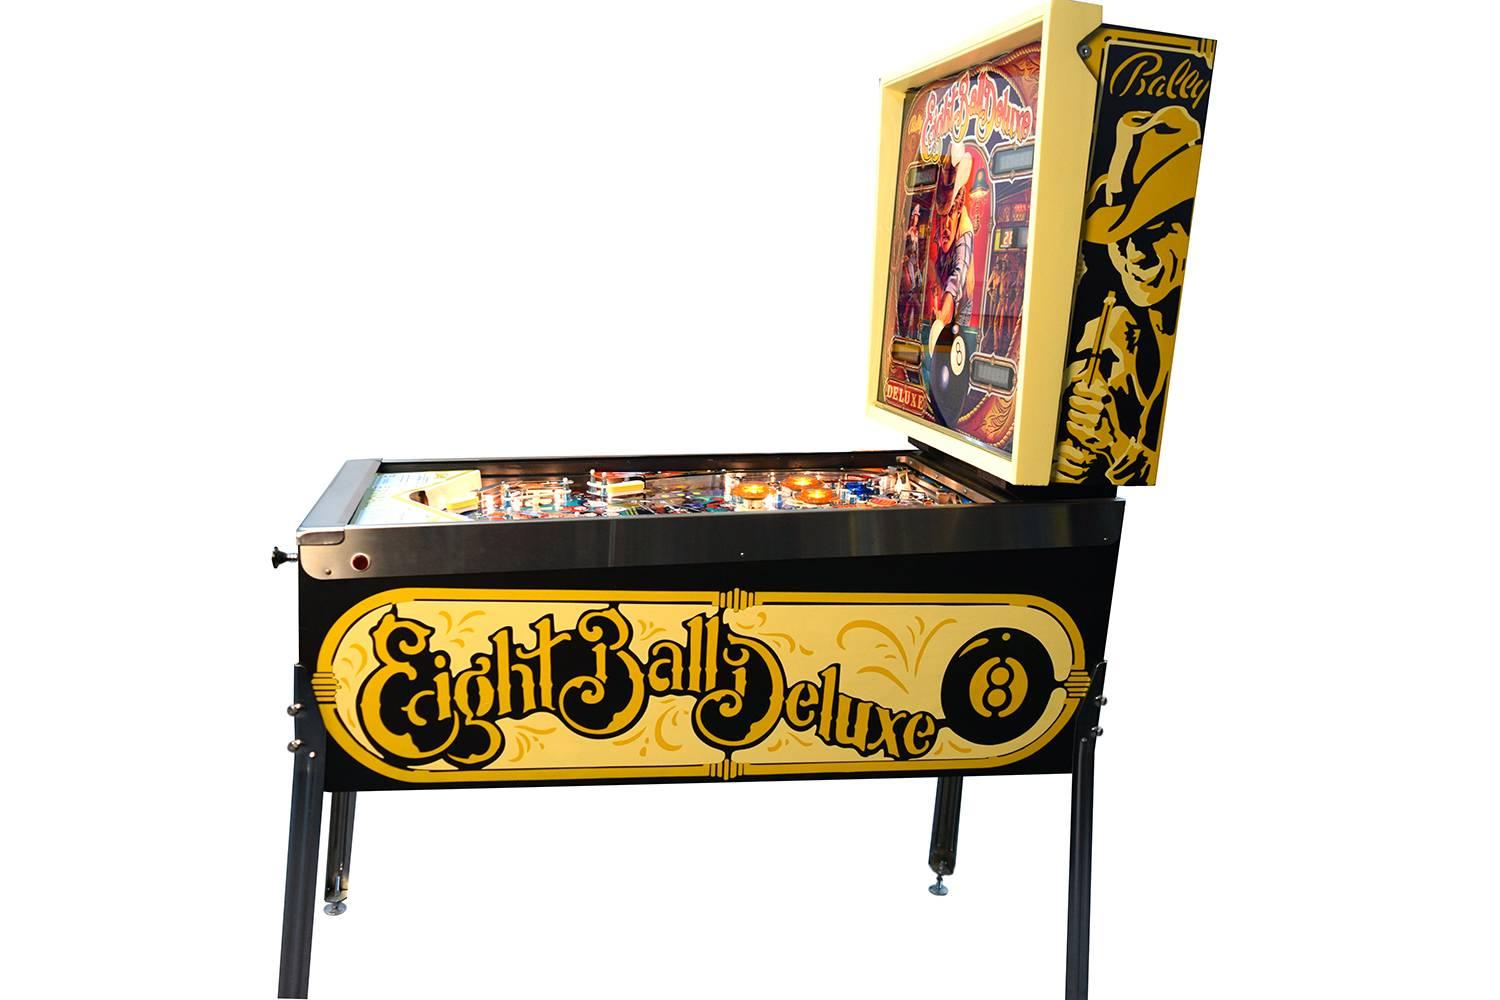 bally eight ball deluxe pinball machine for sale